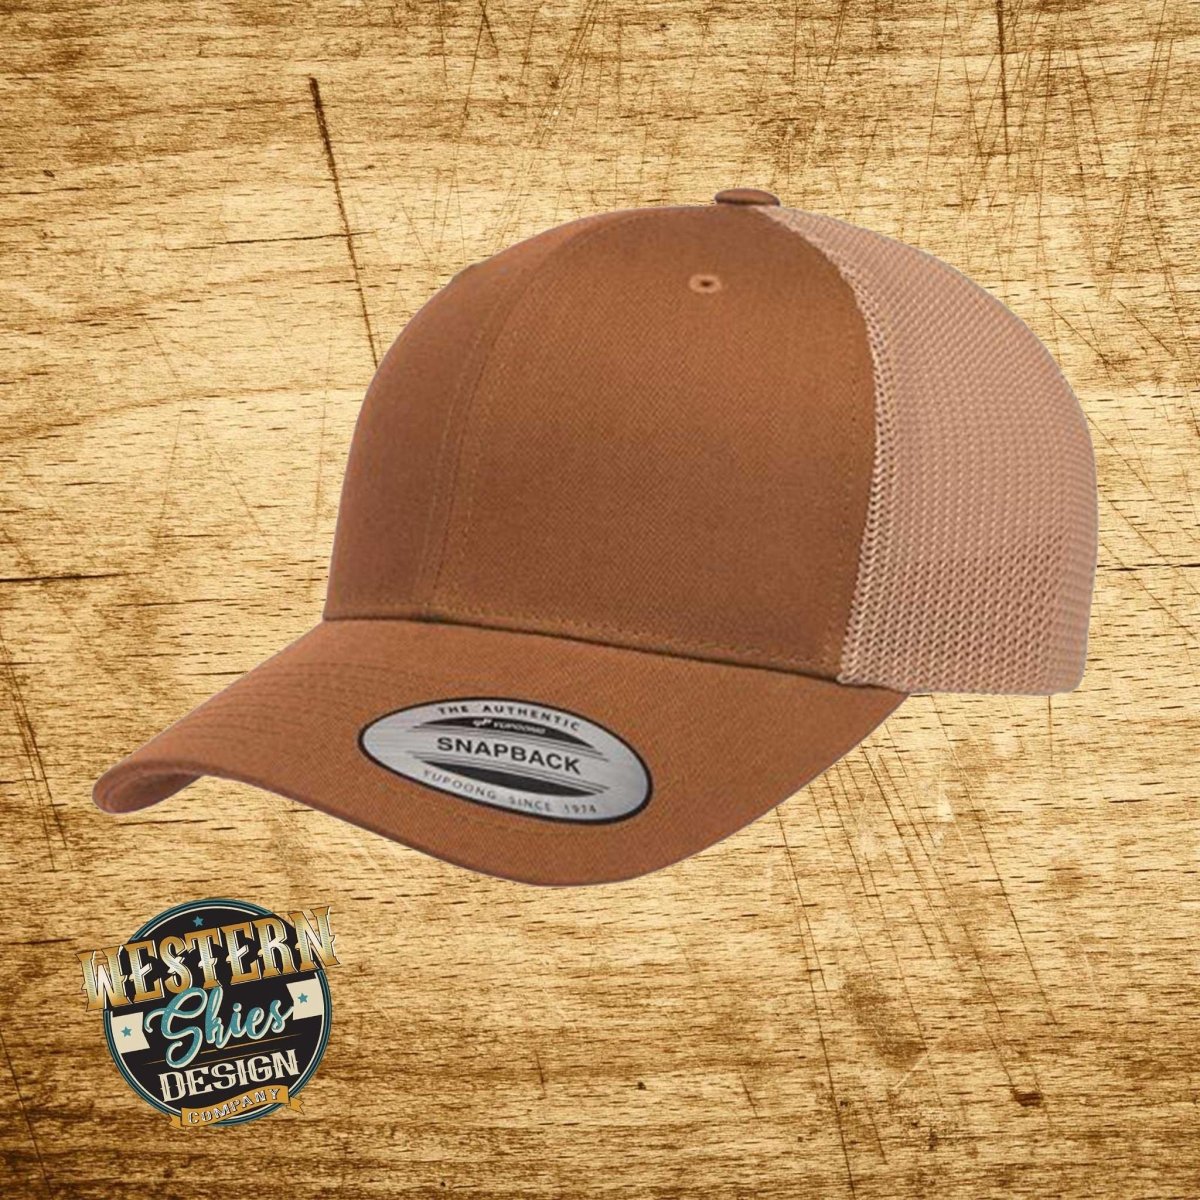 6606 Western Classic – Design Trucker Company Yupoong Hat Skies